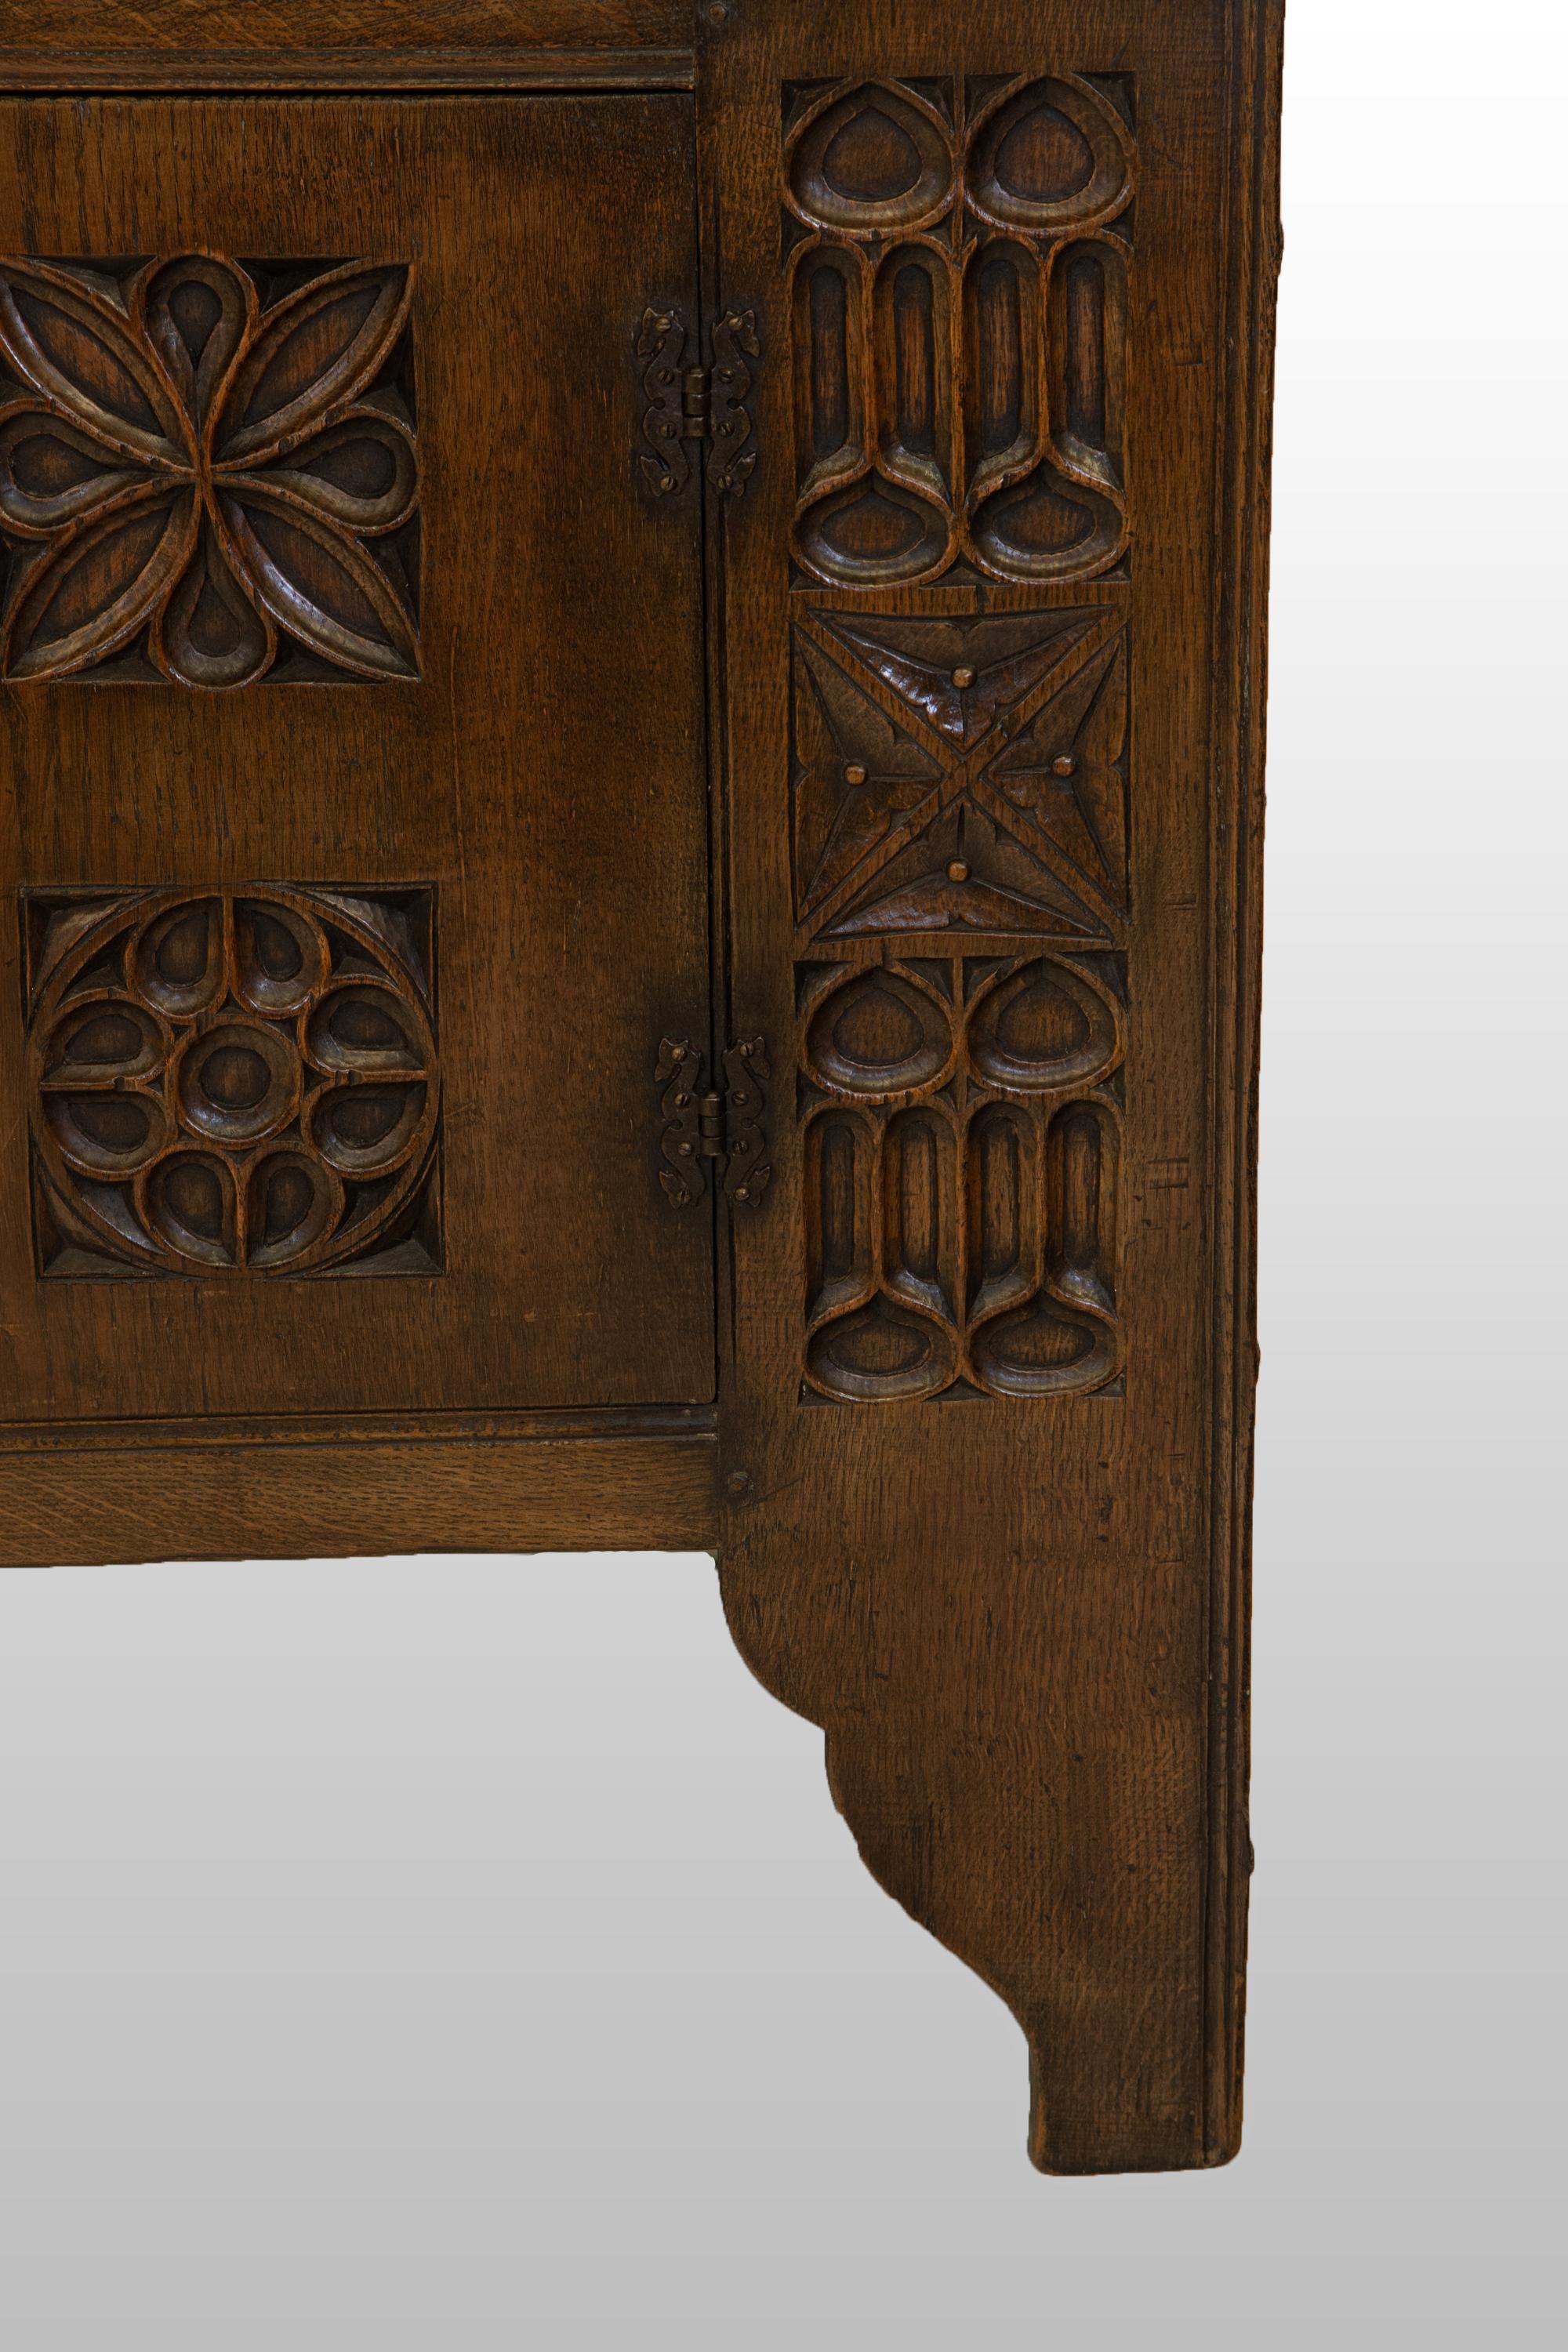 Gothic Revival Carved Oak Cabinet 20th Century For Sale 1